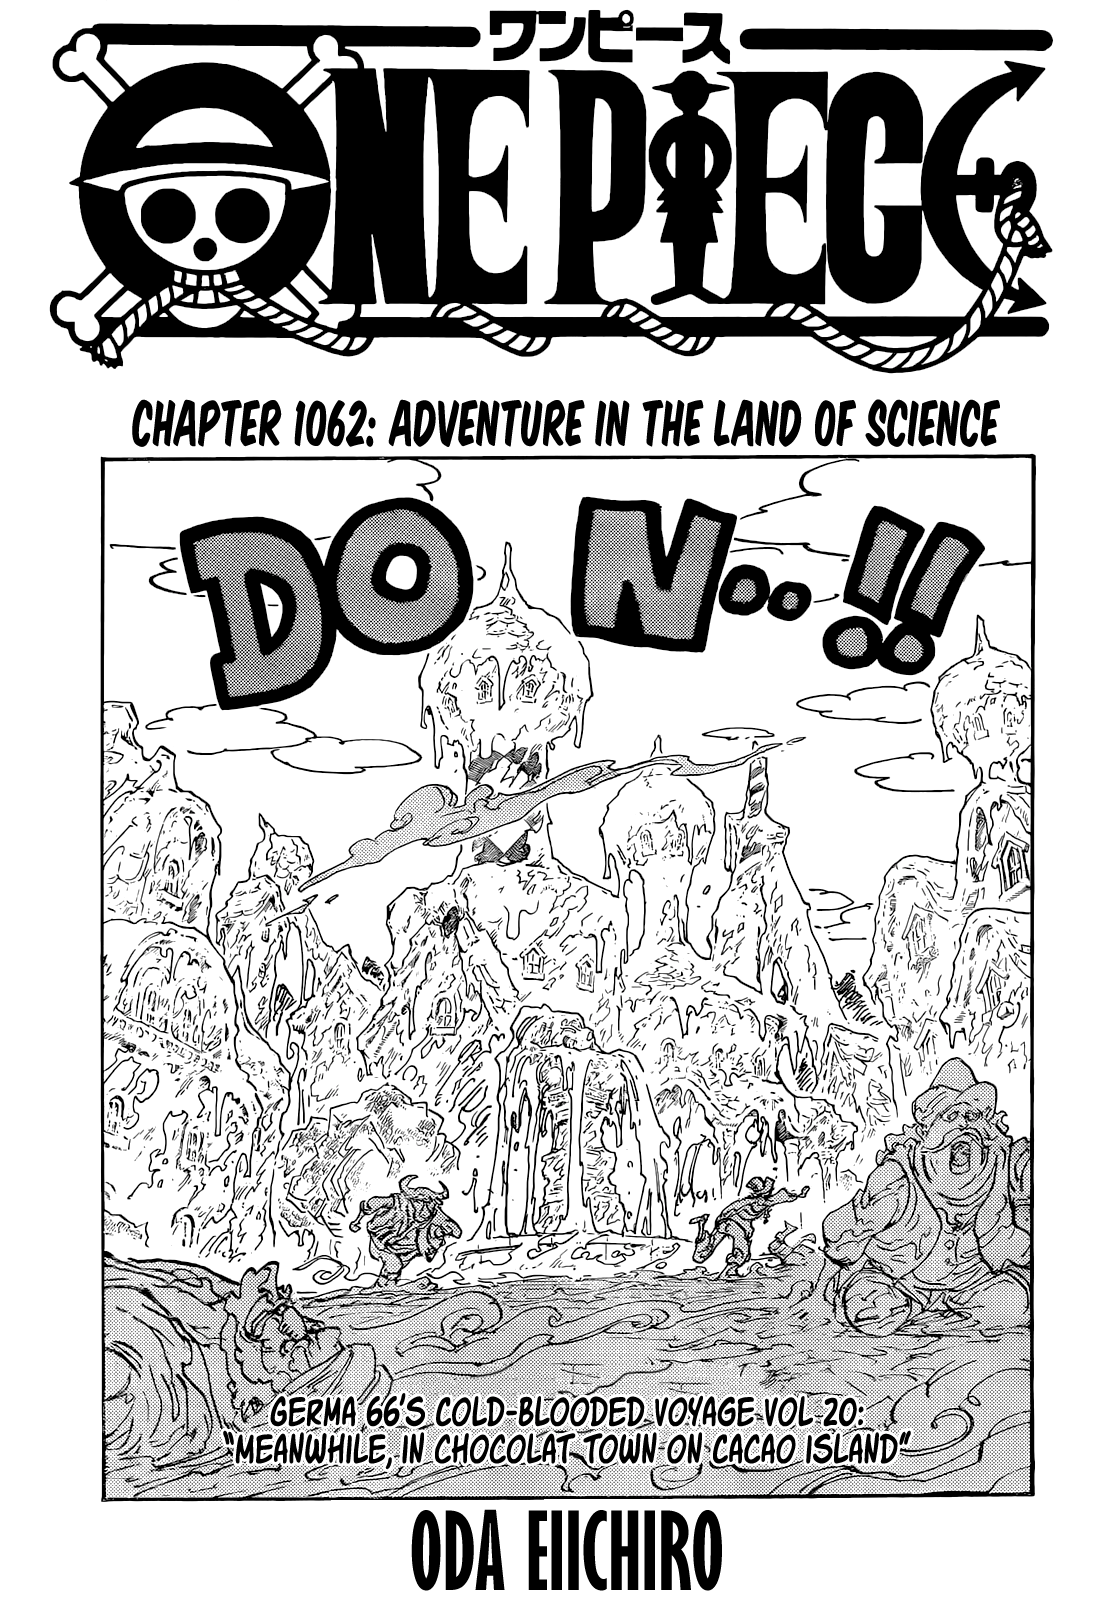 One Piece, Chapter 1062 | TcbScans Org - Free Manga Online in High Quality